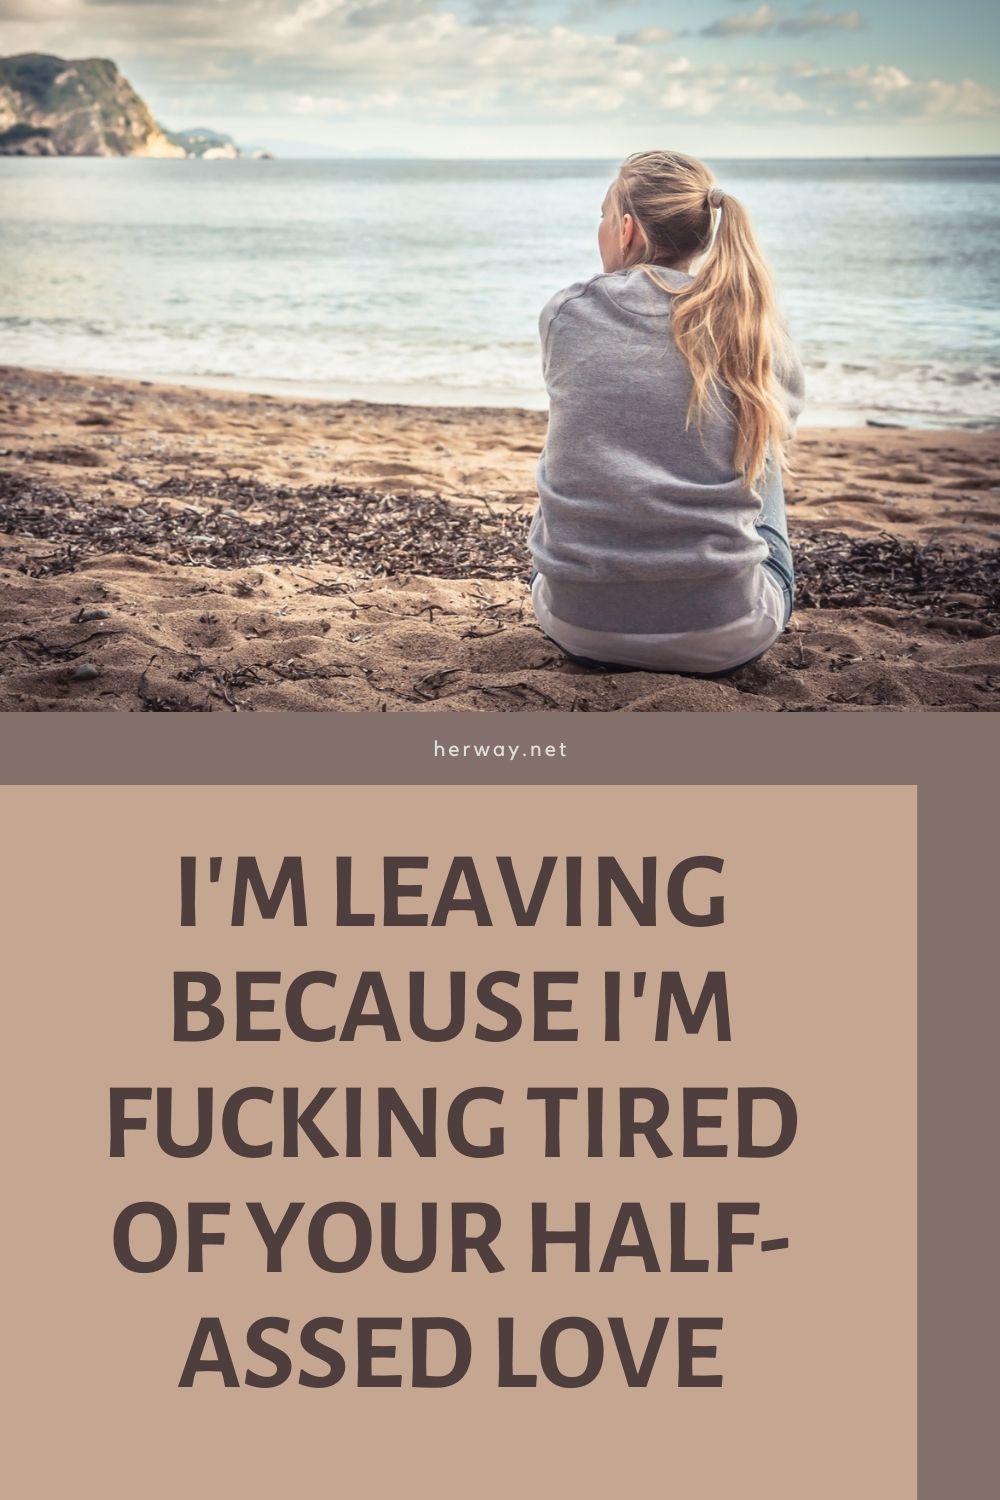 I'm Leaving Because I'm Fucking Tired Of Your Half-Assed Love